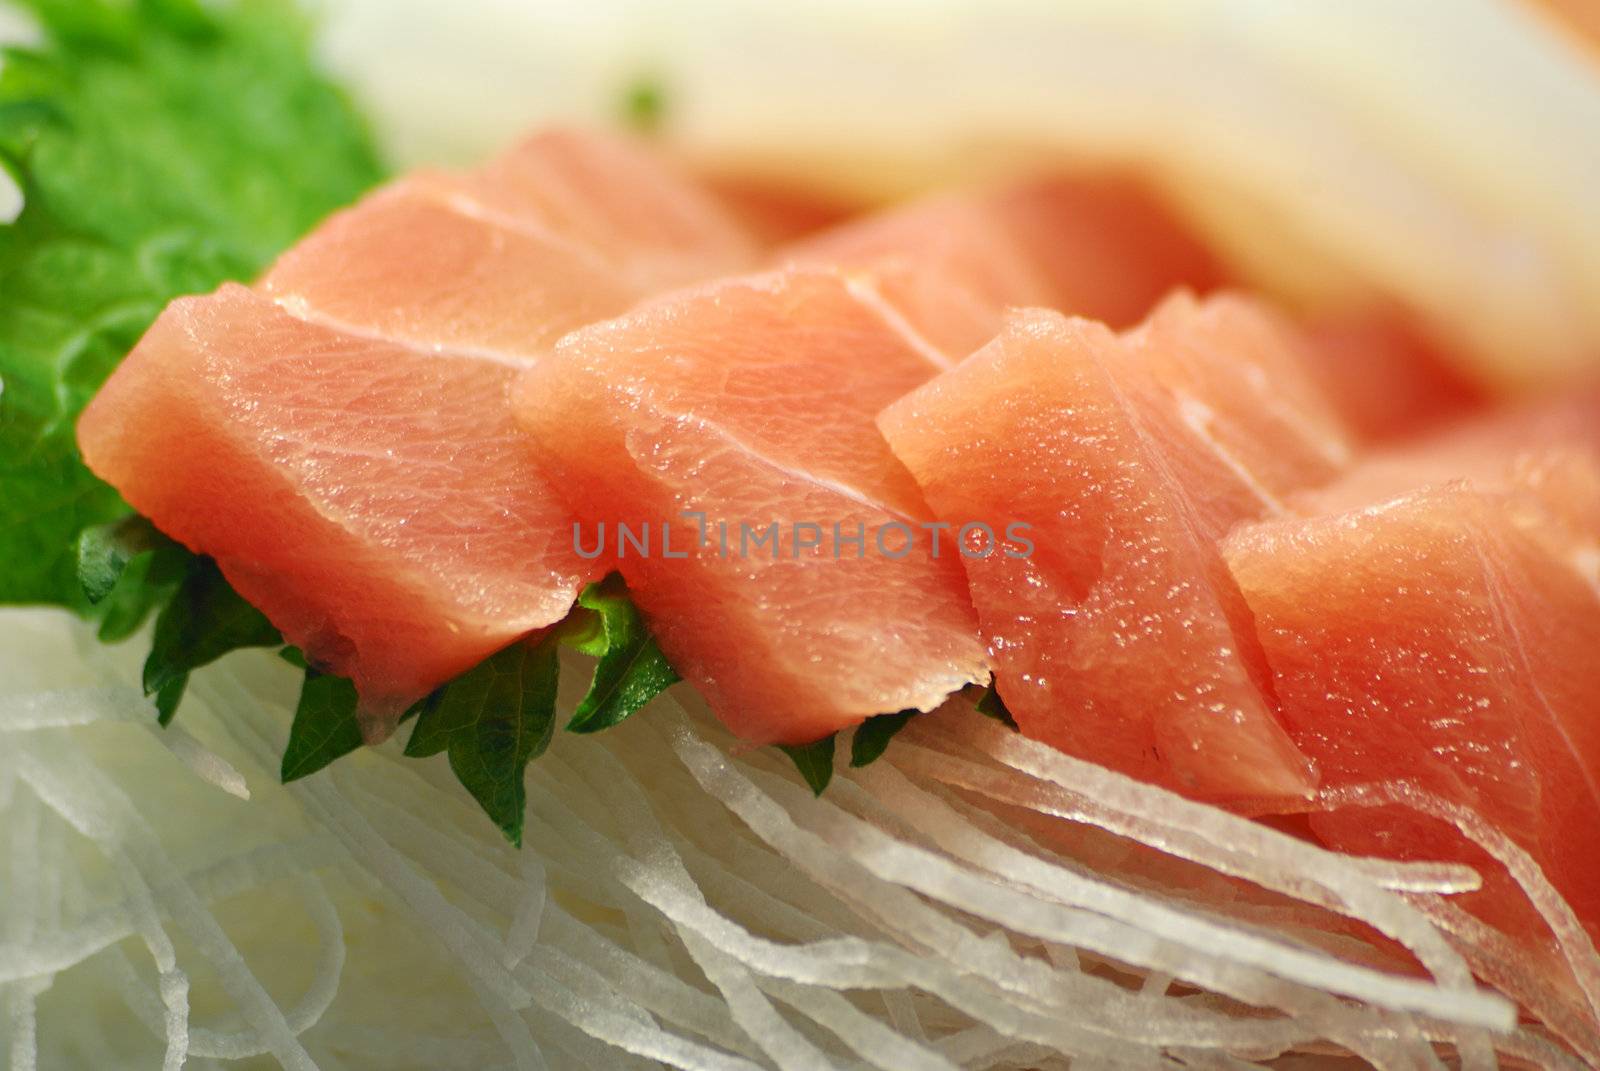  macro image of served Japanese raw fish food called sasimi; focus on front pieces